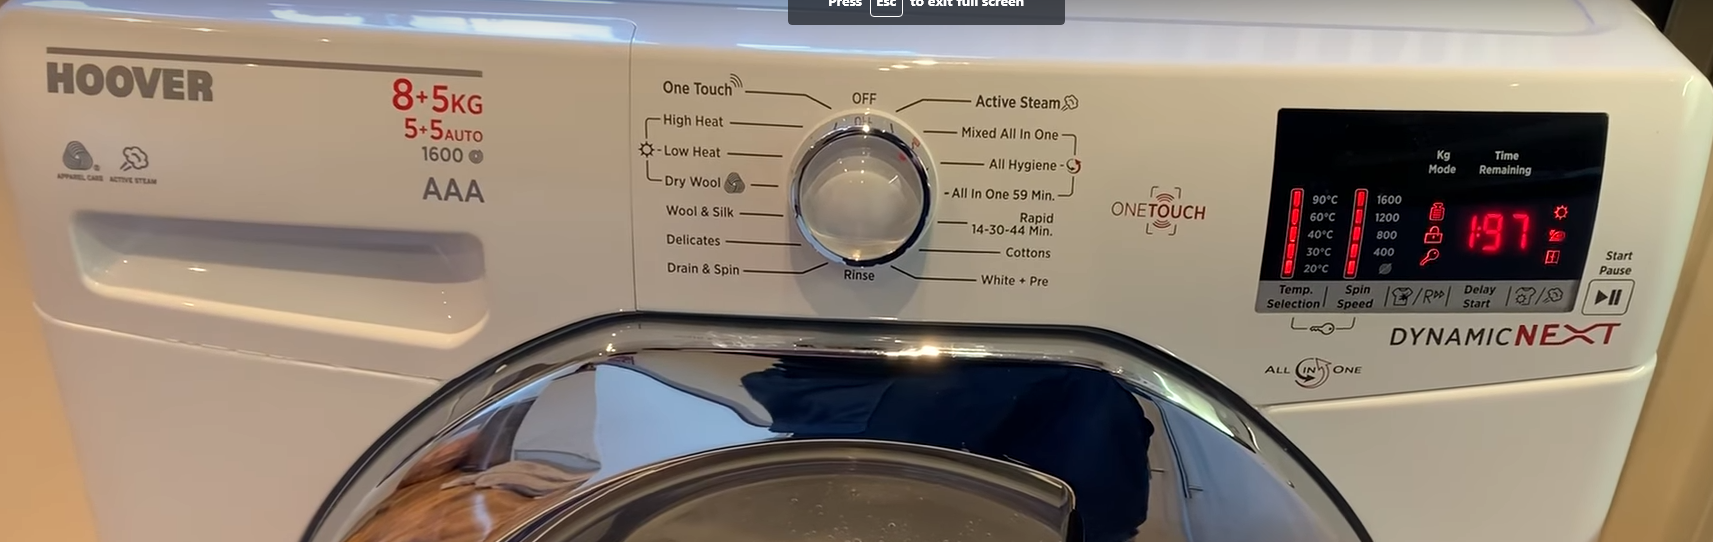 Hoover Washing Machine with control panel